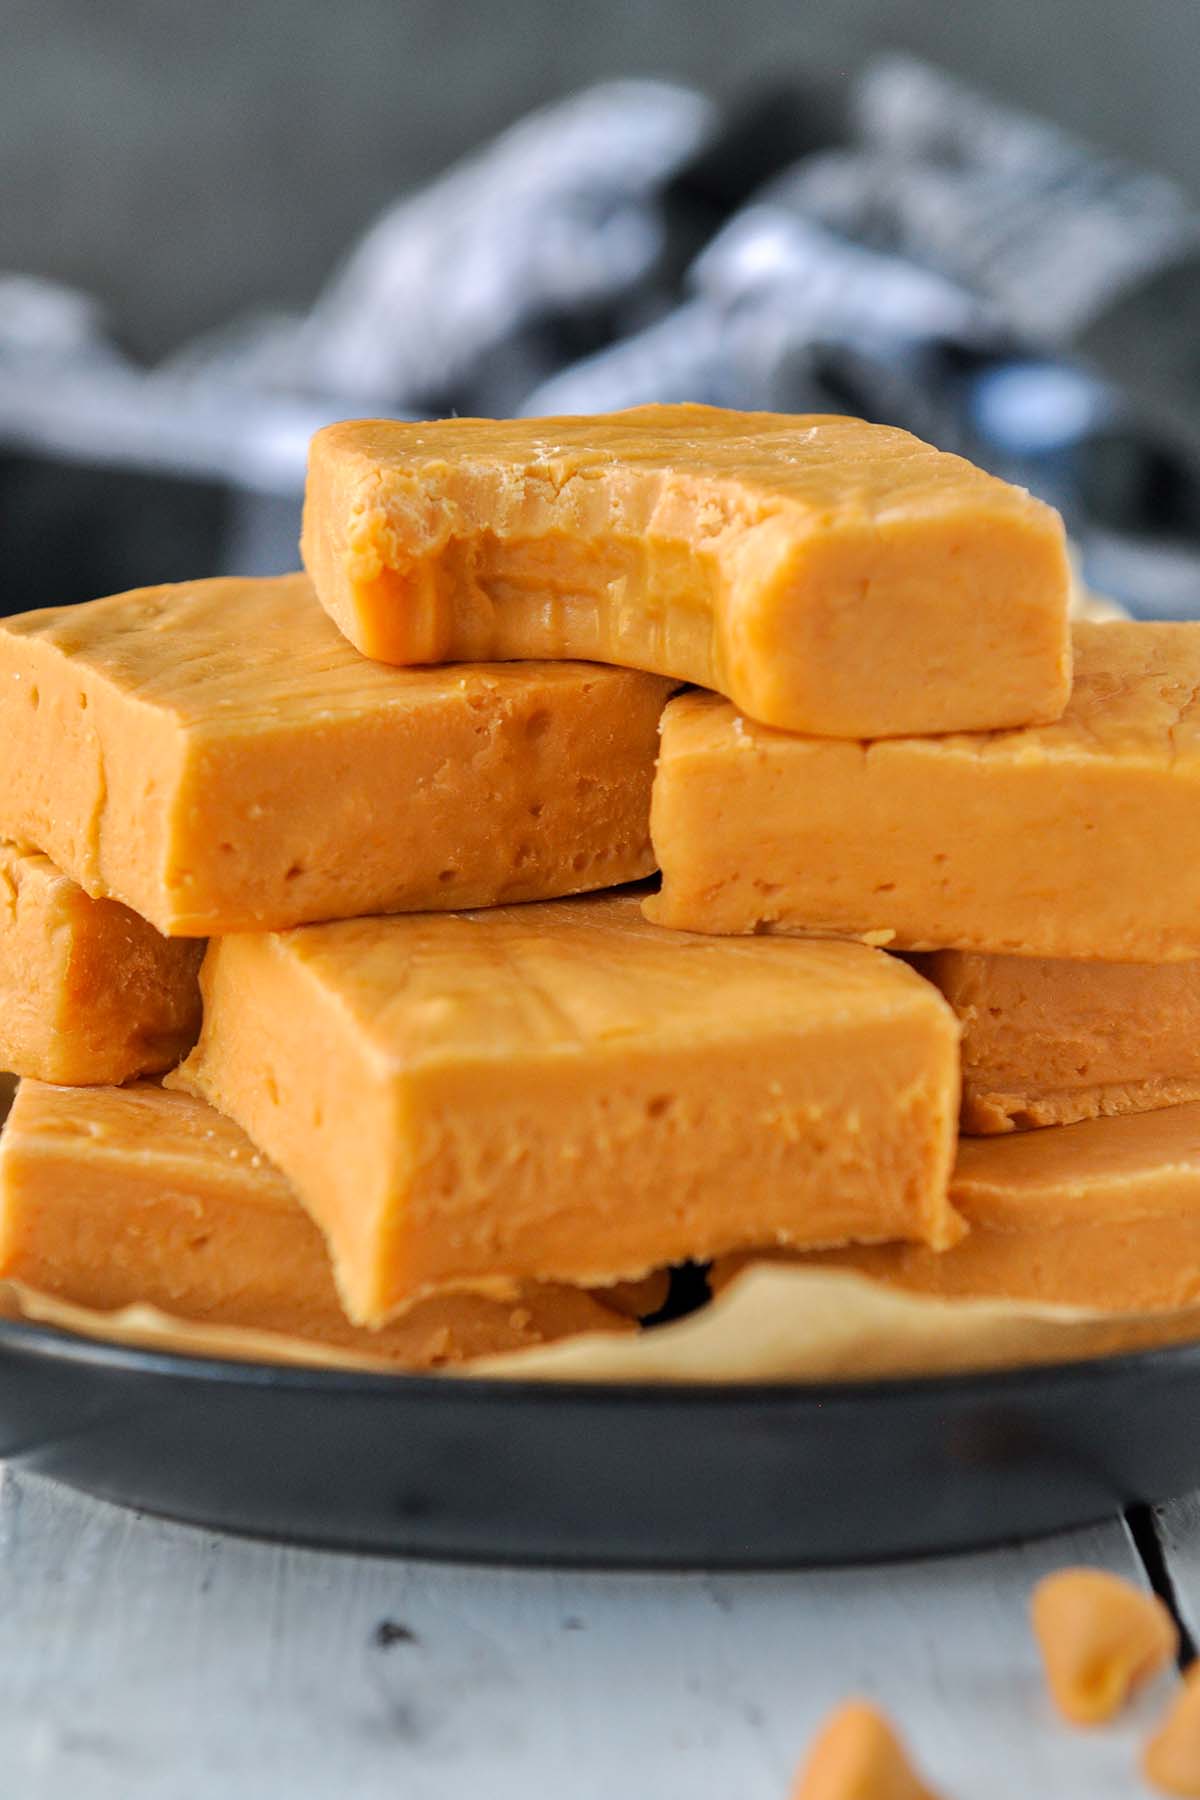 A plate of stacked butterscotch fudge, with the top piece missing a bite.